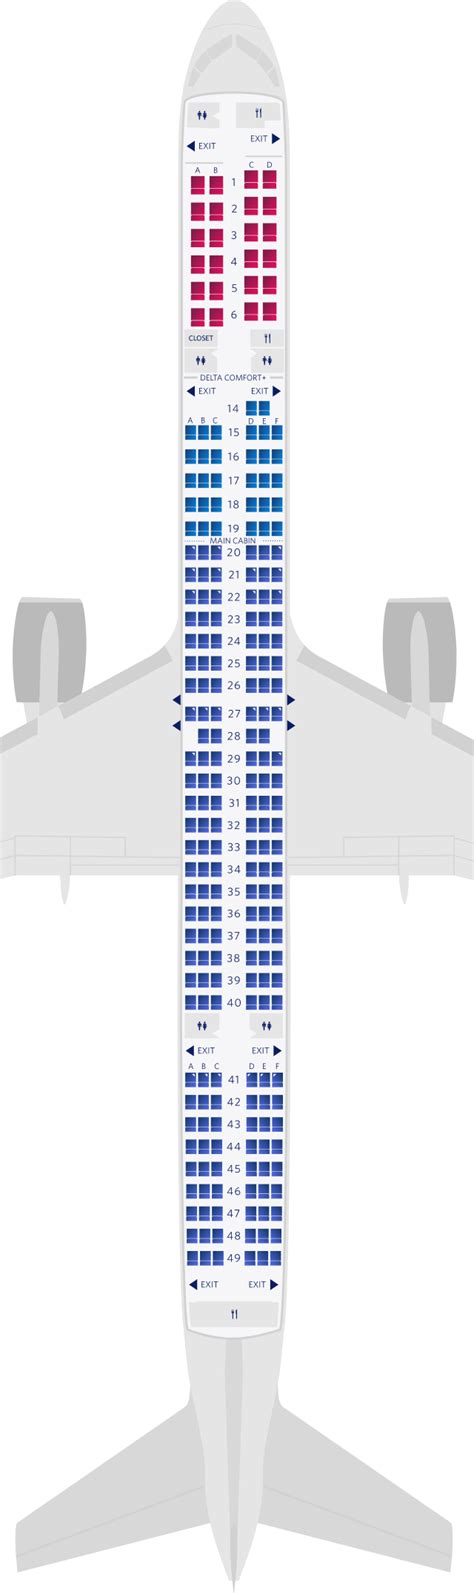 757-300 seat map delta. Nov 20, 2012 · These dual aisle planes are generally used for long-haul and trans-oceanic flights. This plane has a cruise speed of 535mph, a range of 3740miles and a capacity of 252 passengers. There is a video facility on this plane. Delta provide EmPower power ports on B777, B737-800, and B767-400 aircraft in BusinessElite and all classes of service. 